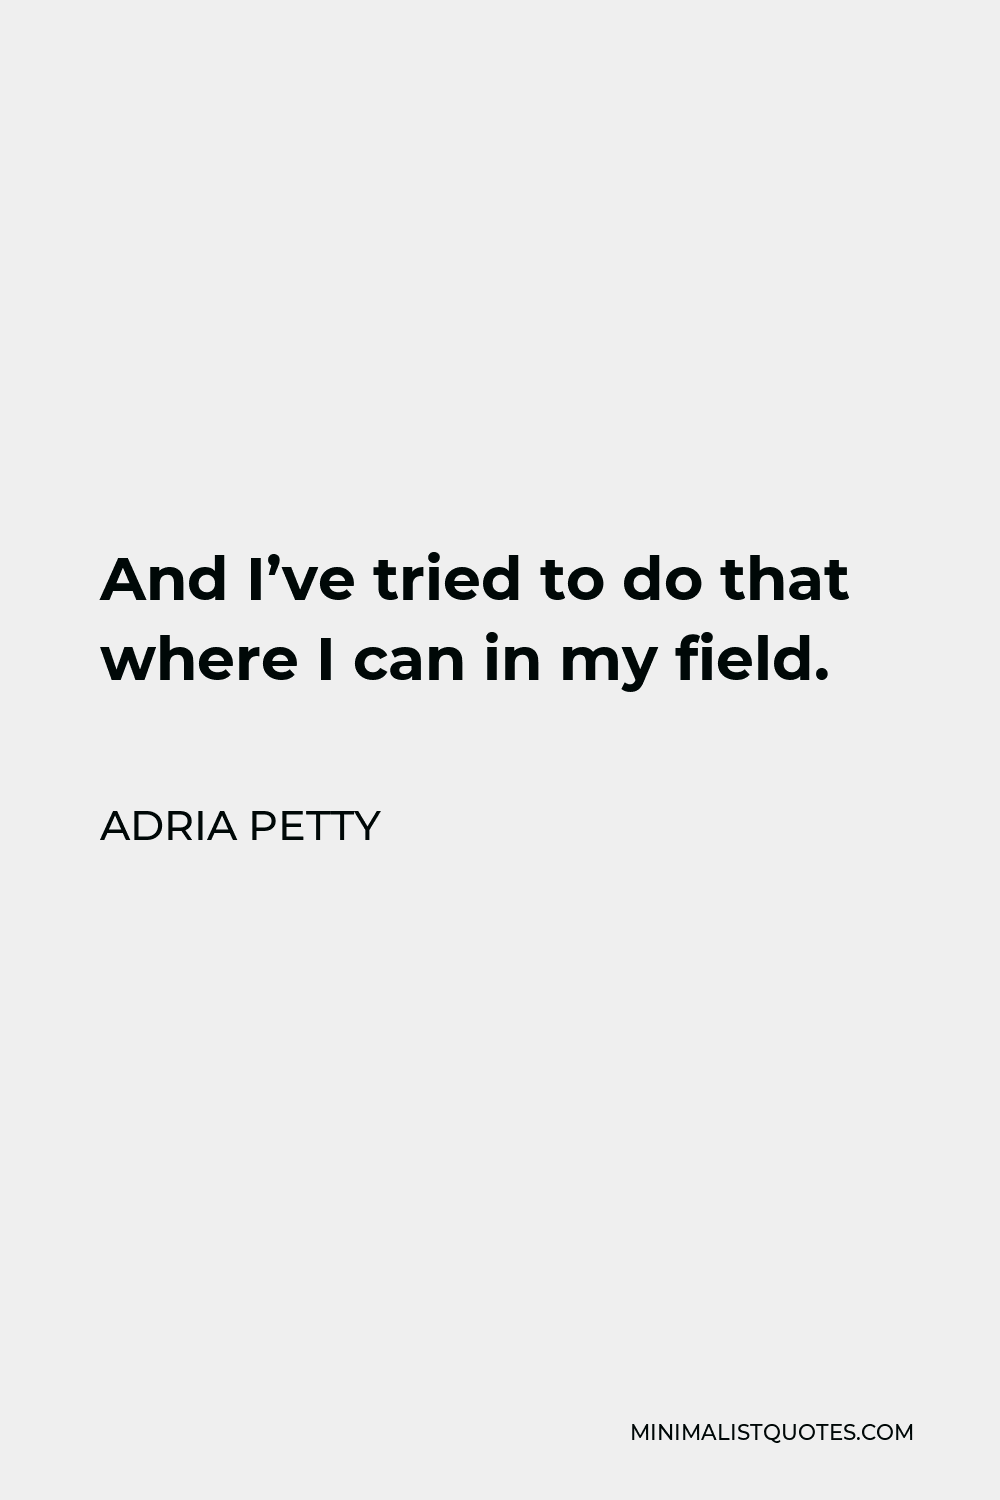 Adria Petty Quote - And I’ve tried to do that where I can in my field.